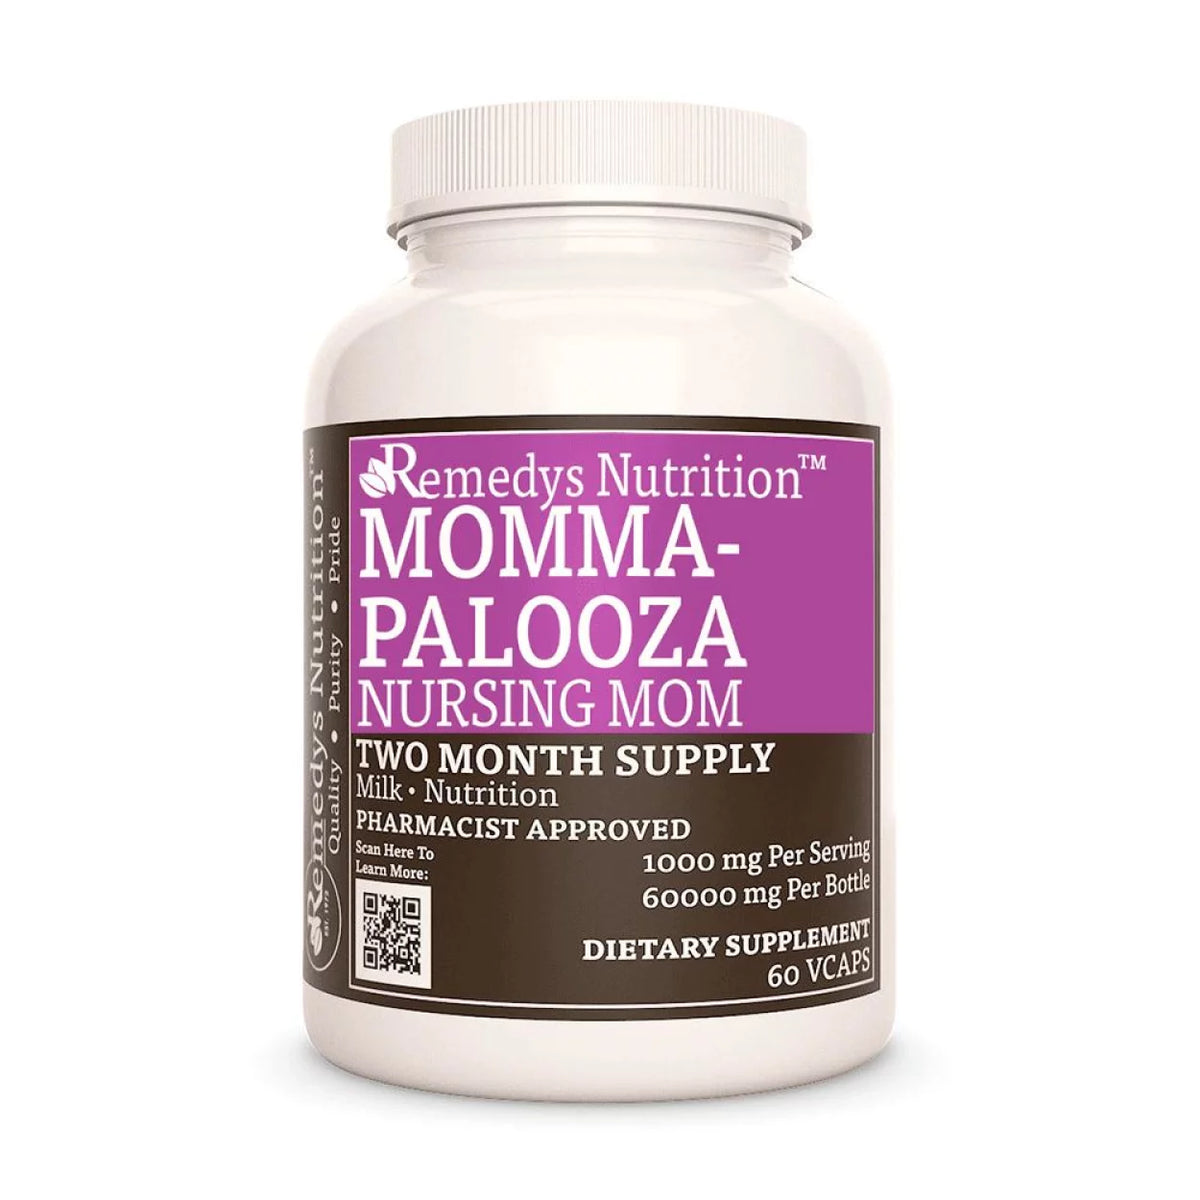 Image of Remedy's Nutrition® Momma-Palooza Nursing Mom™ Capsules Dietary Supplement bottle. Made in USA. Prenatal Vitamins. 